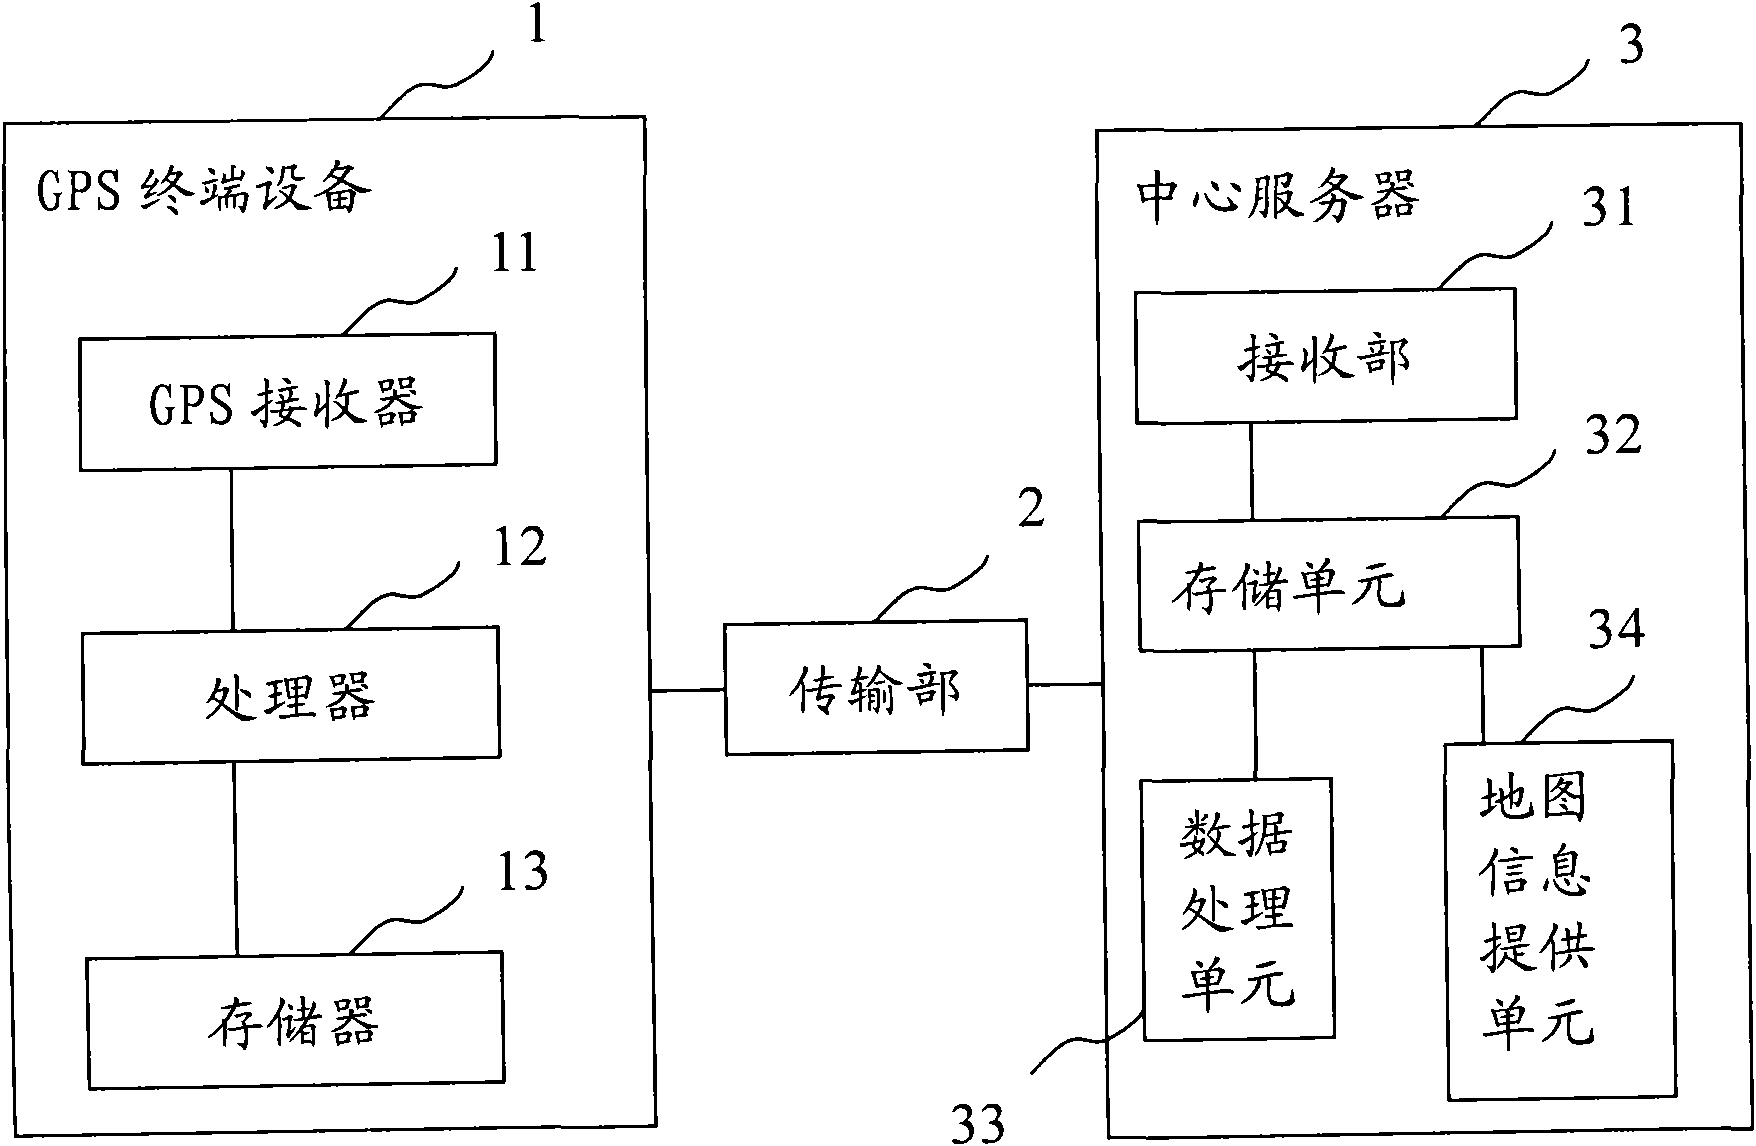 GPS route recording device and route forming system